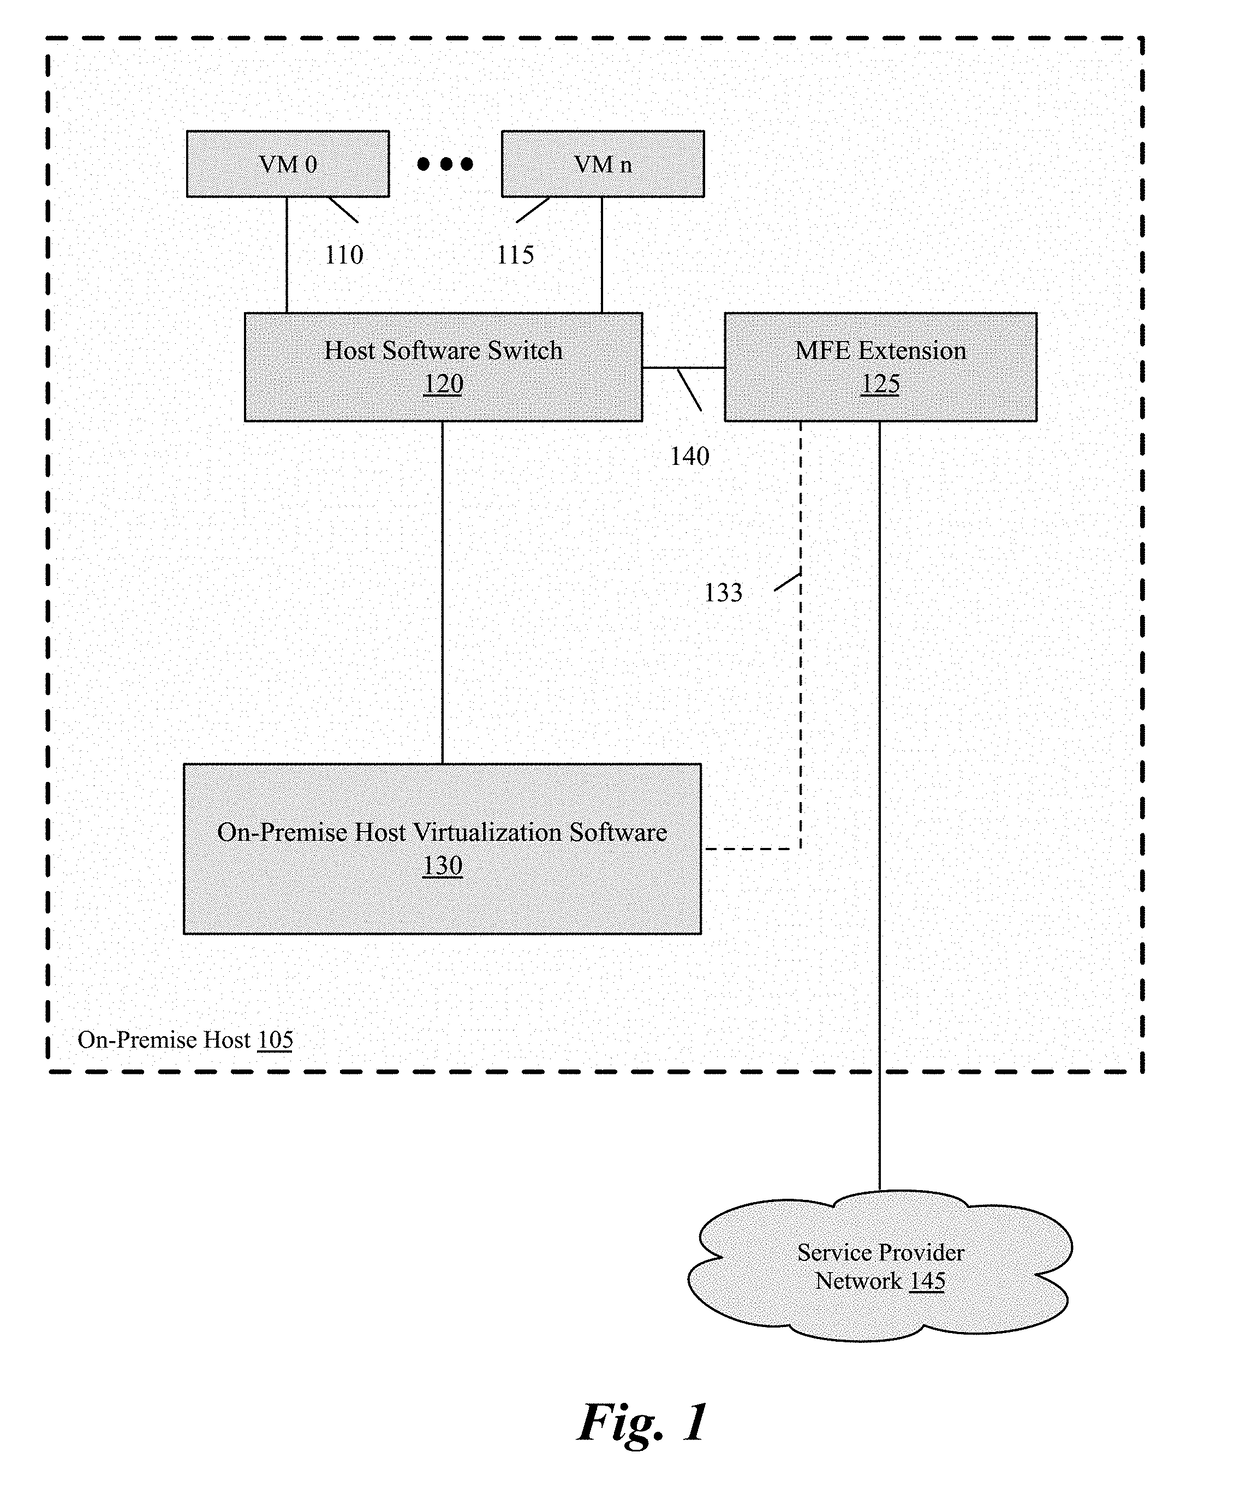 Packet communication between logical networks and public cloud service providers native networks using a single network interface and a single routing table